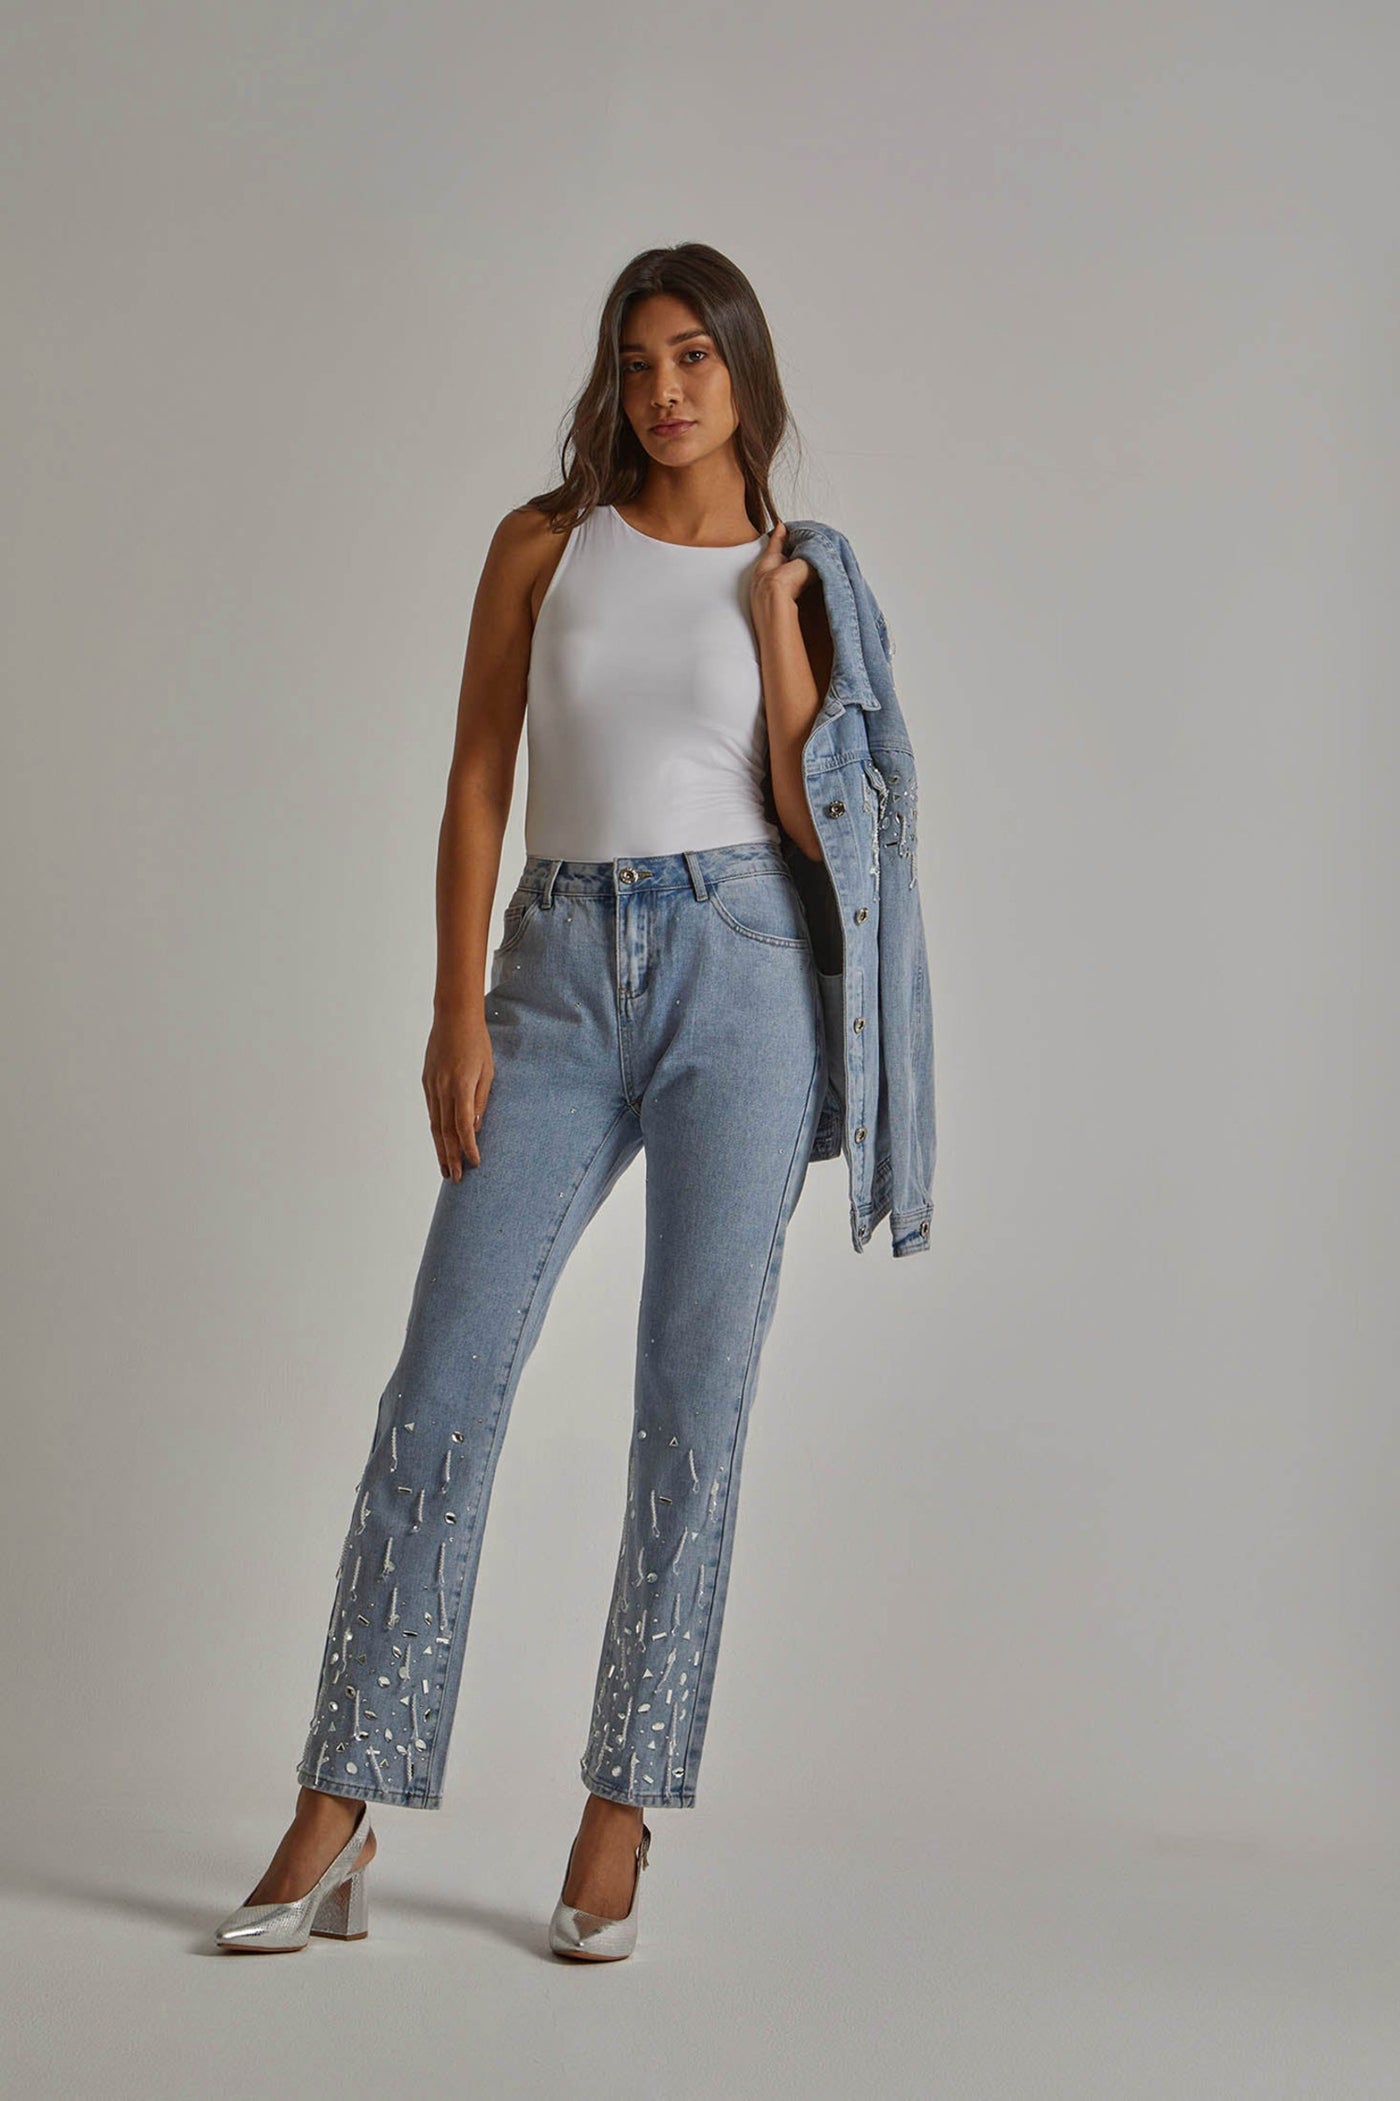 Jeans - Crystal Trimmed - Stylish